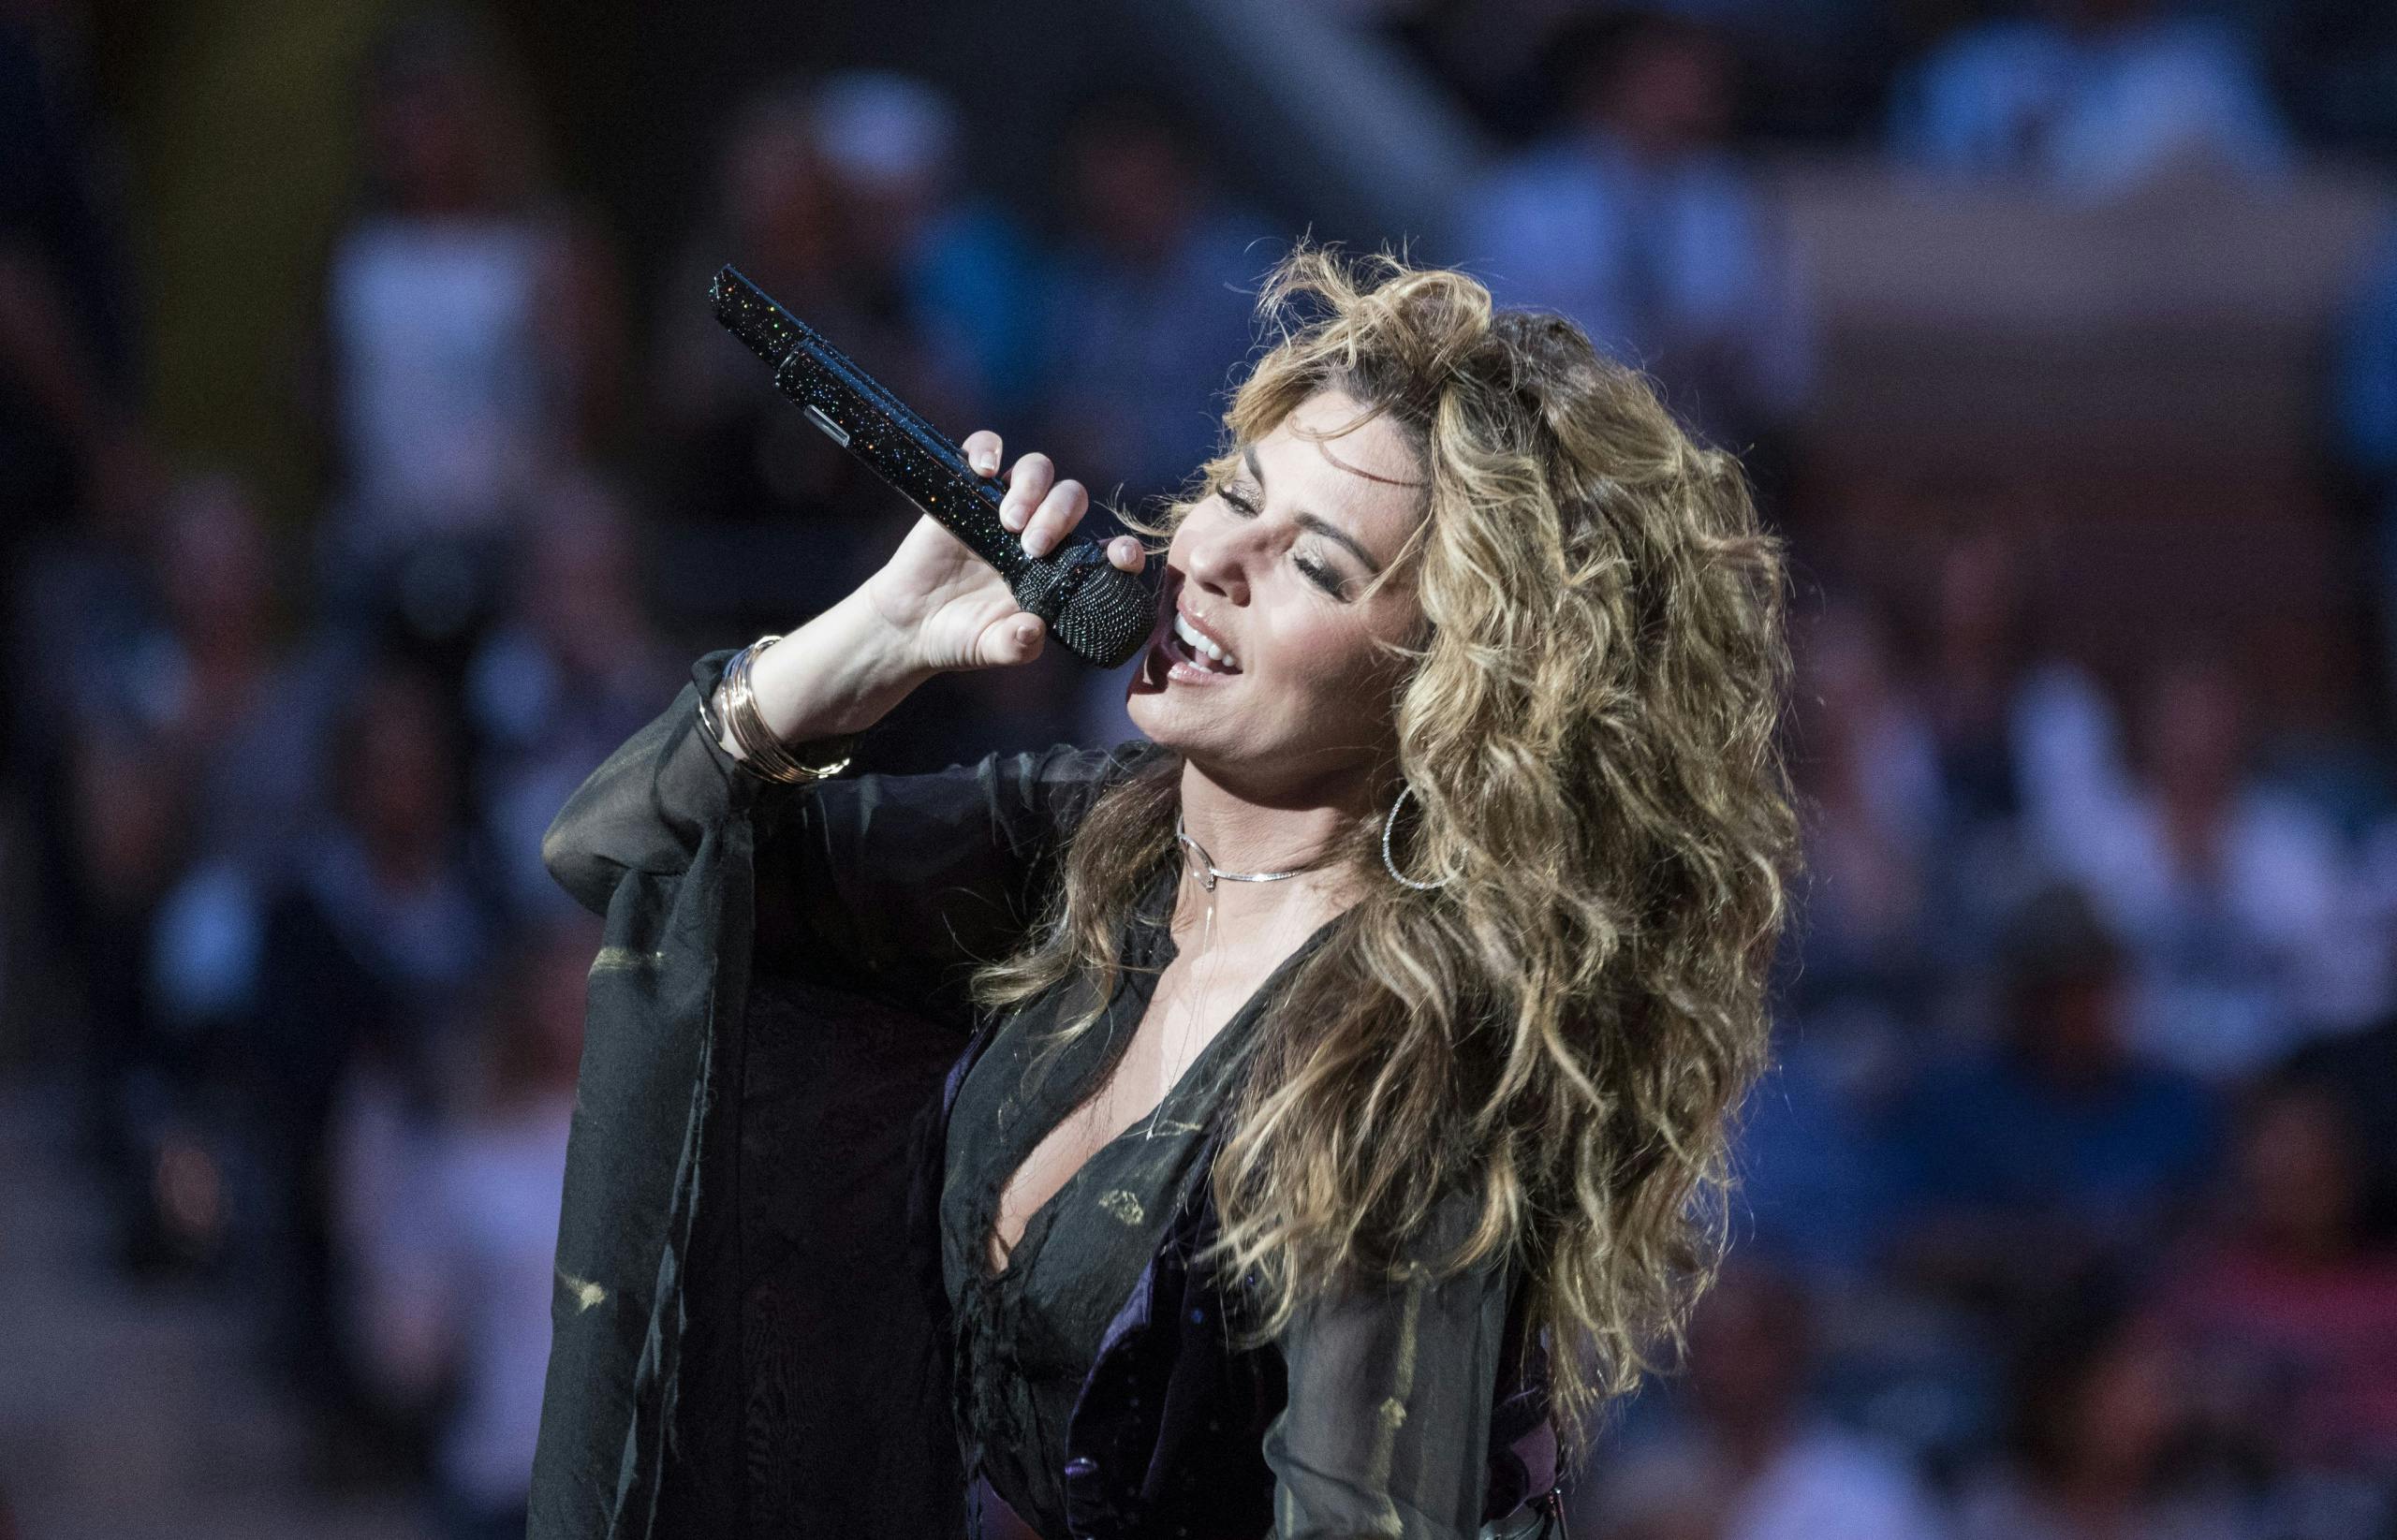 Follow Shania Twain’s lead and make sure product isn’t the forgotten P of marketing